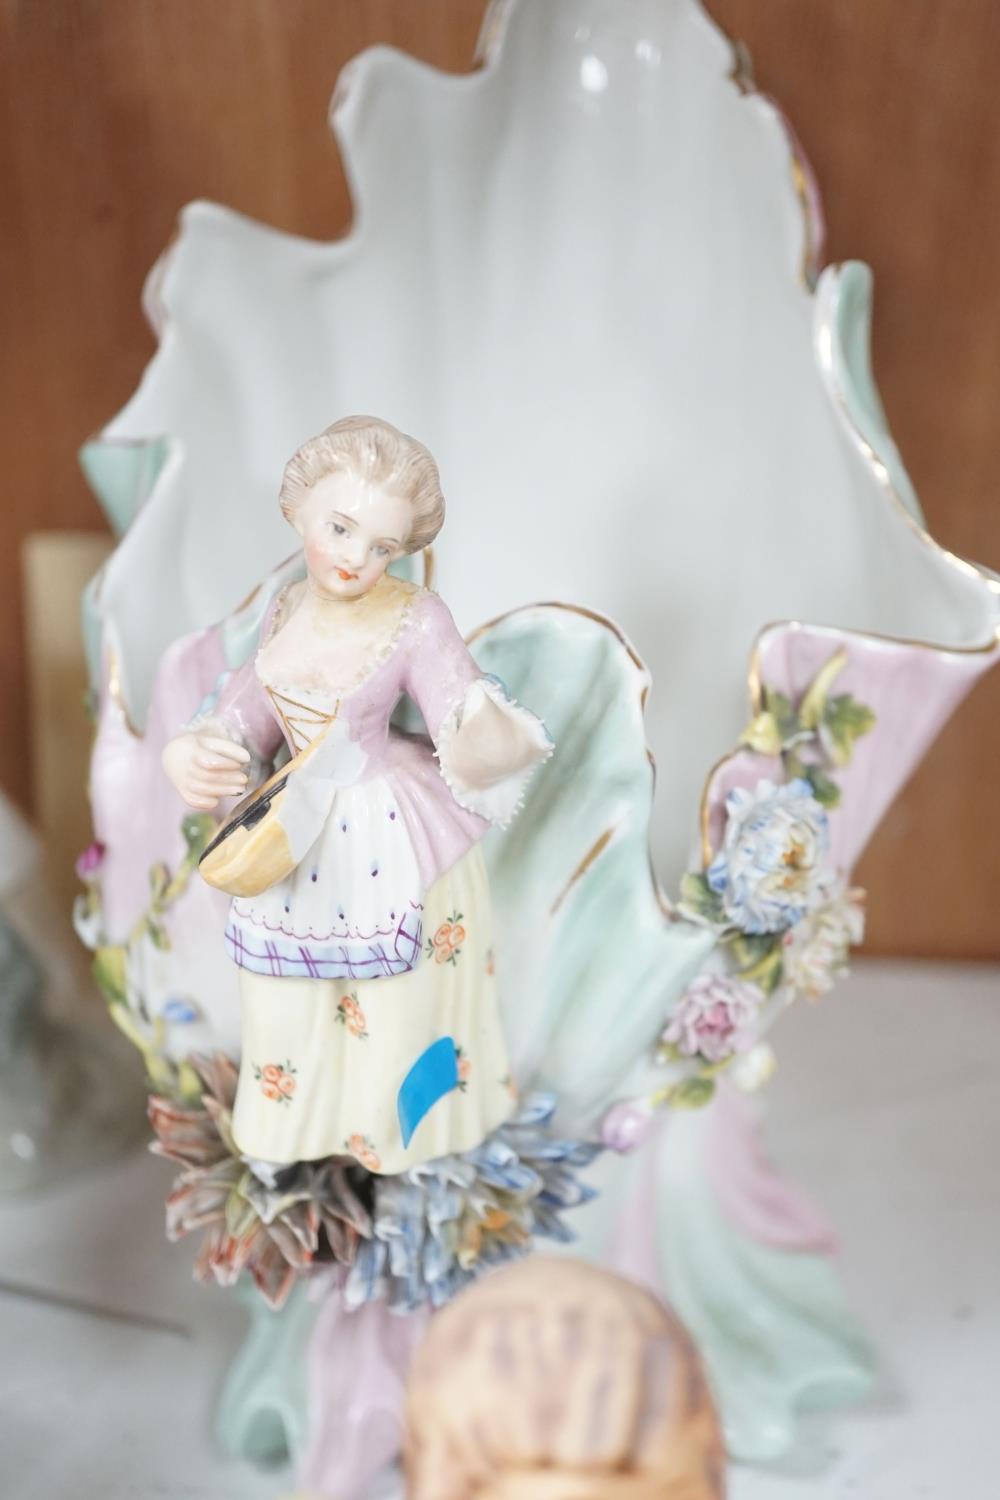 A collection of Lladro and Goebel ceramic figures etc., tallest 30cm - Image 6 of 8